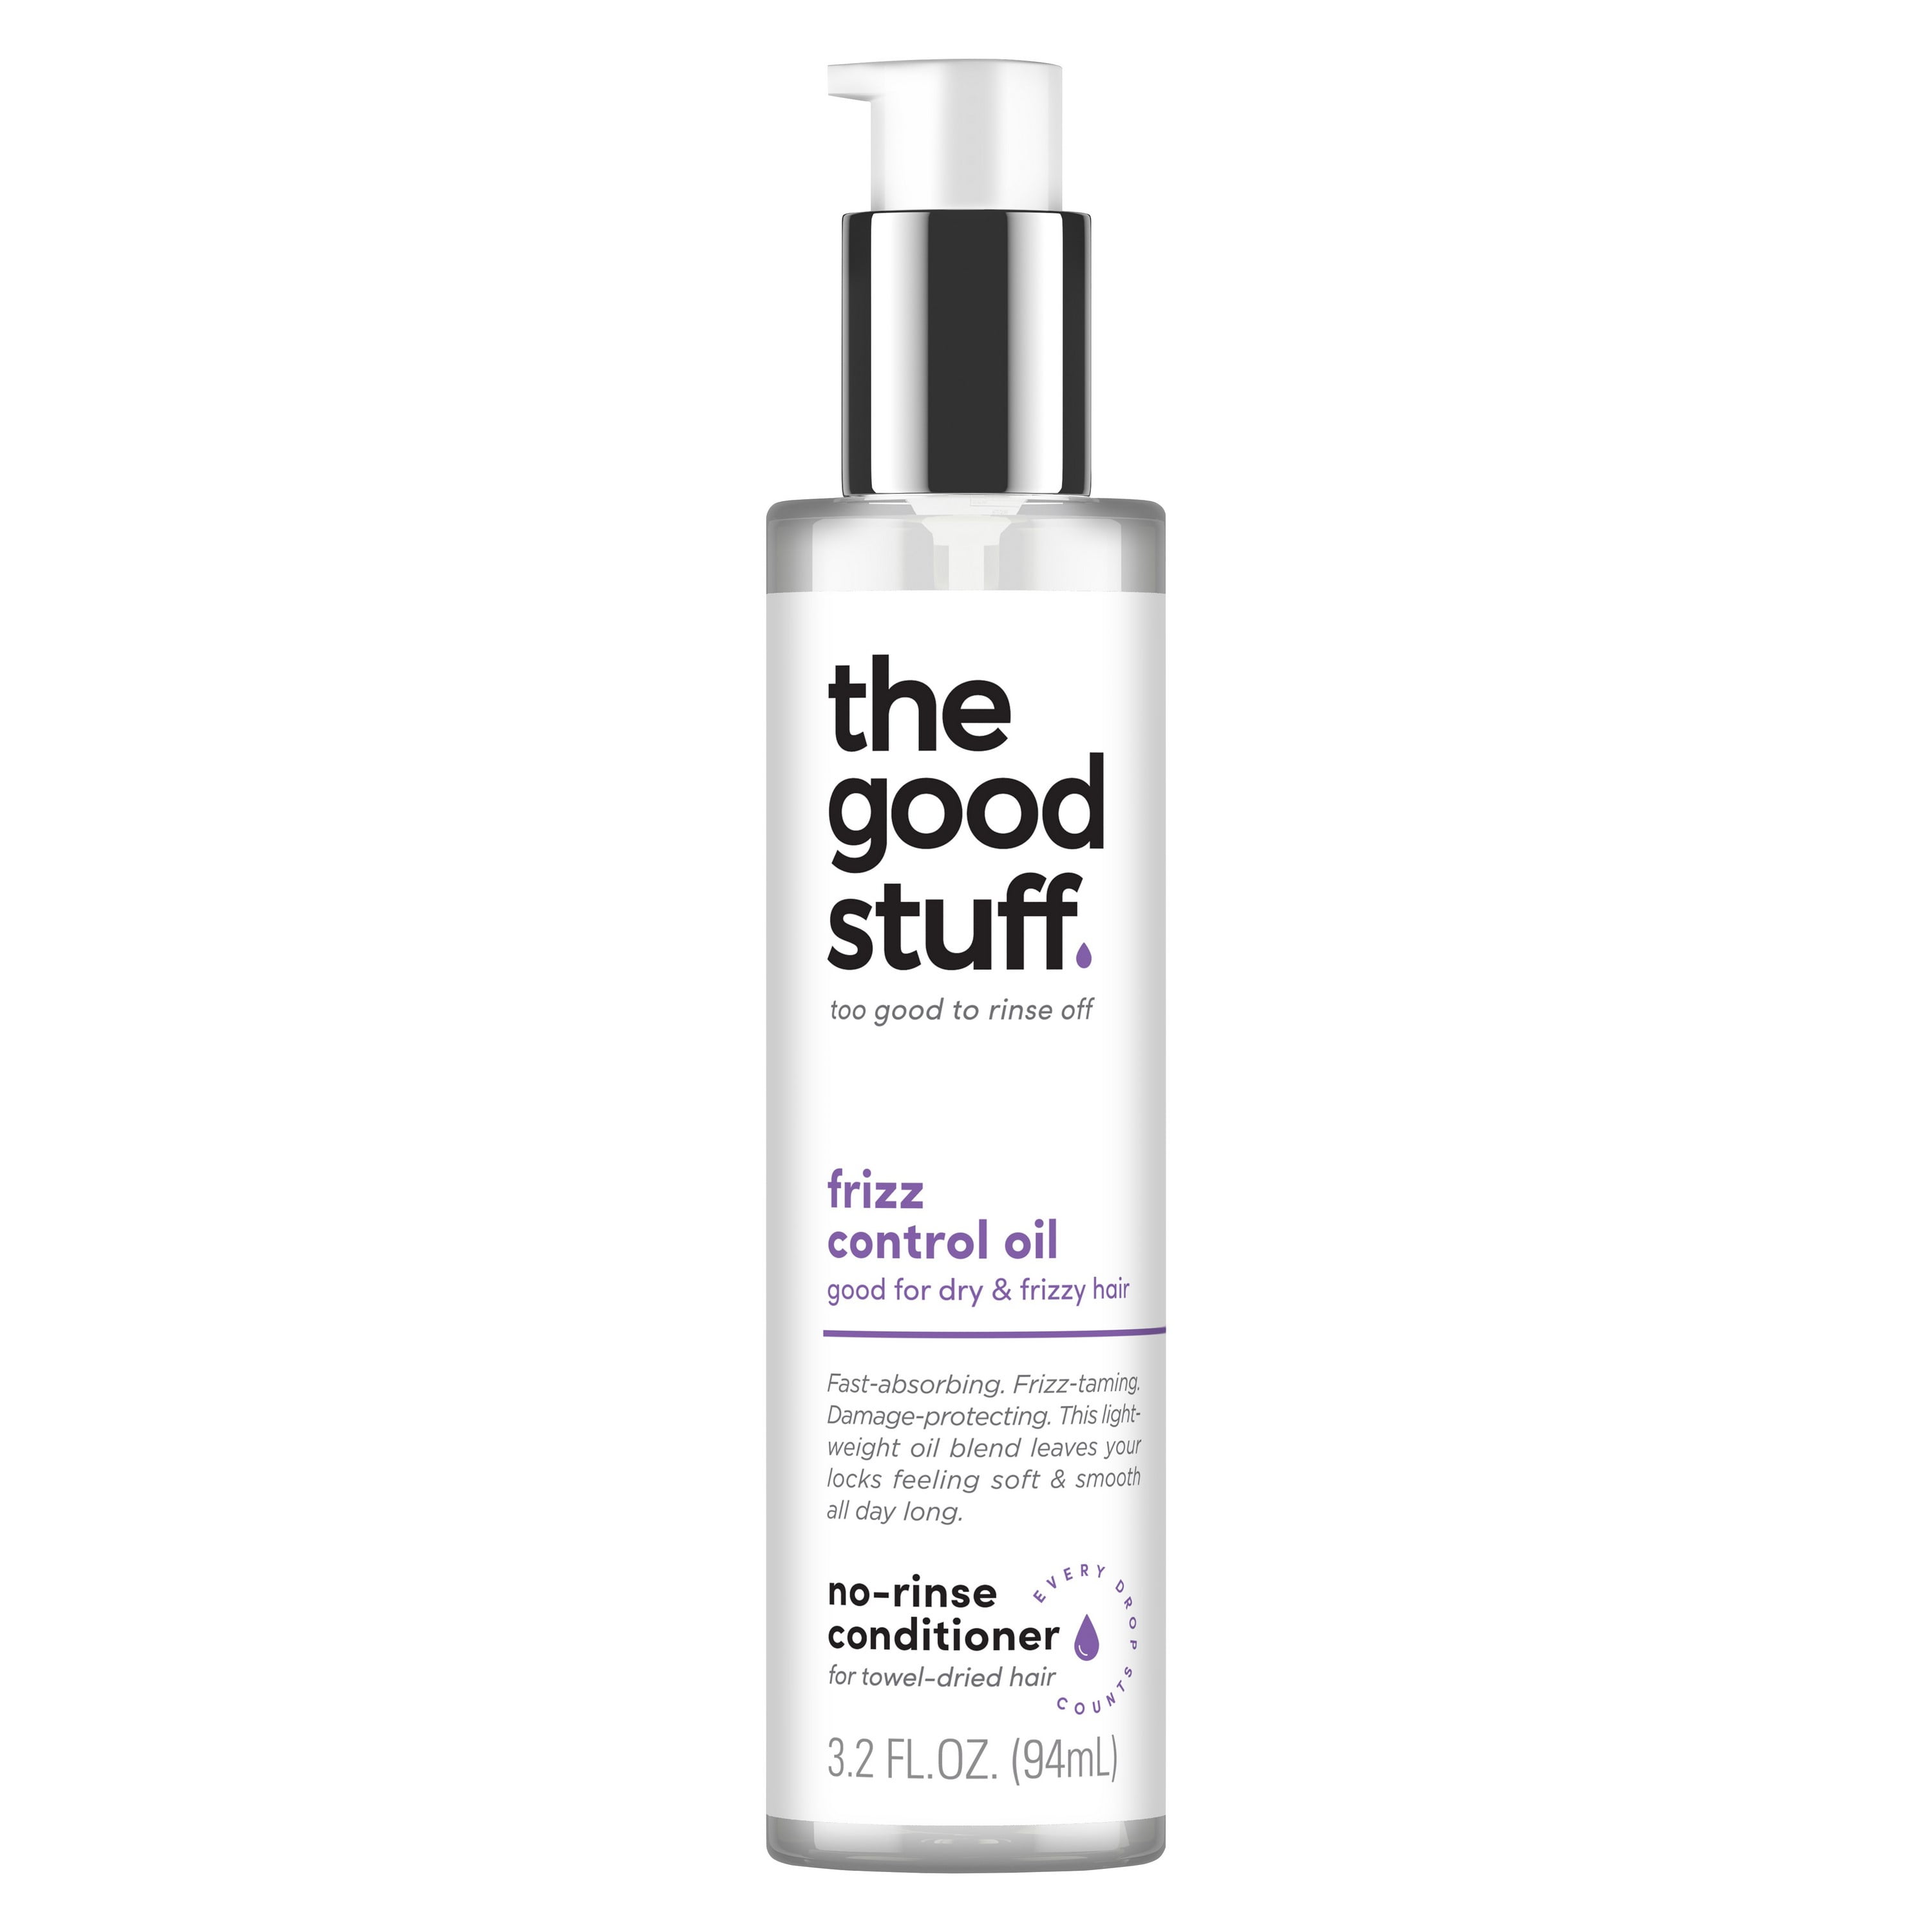 The Good Stuff Oil Anti Frizz Conditioner For Frizzy Hair,  oz -  